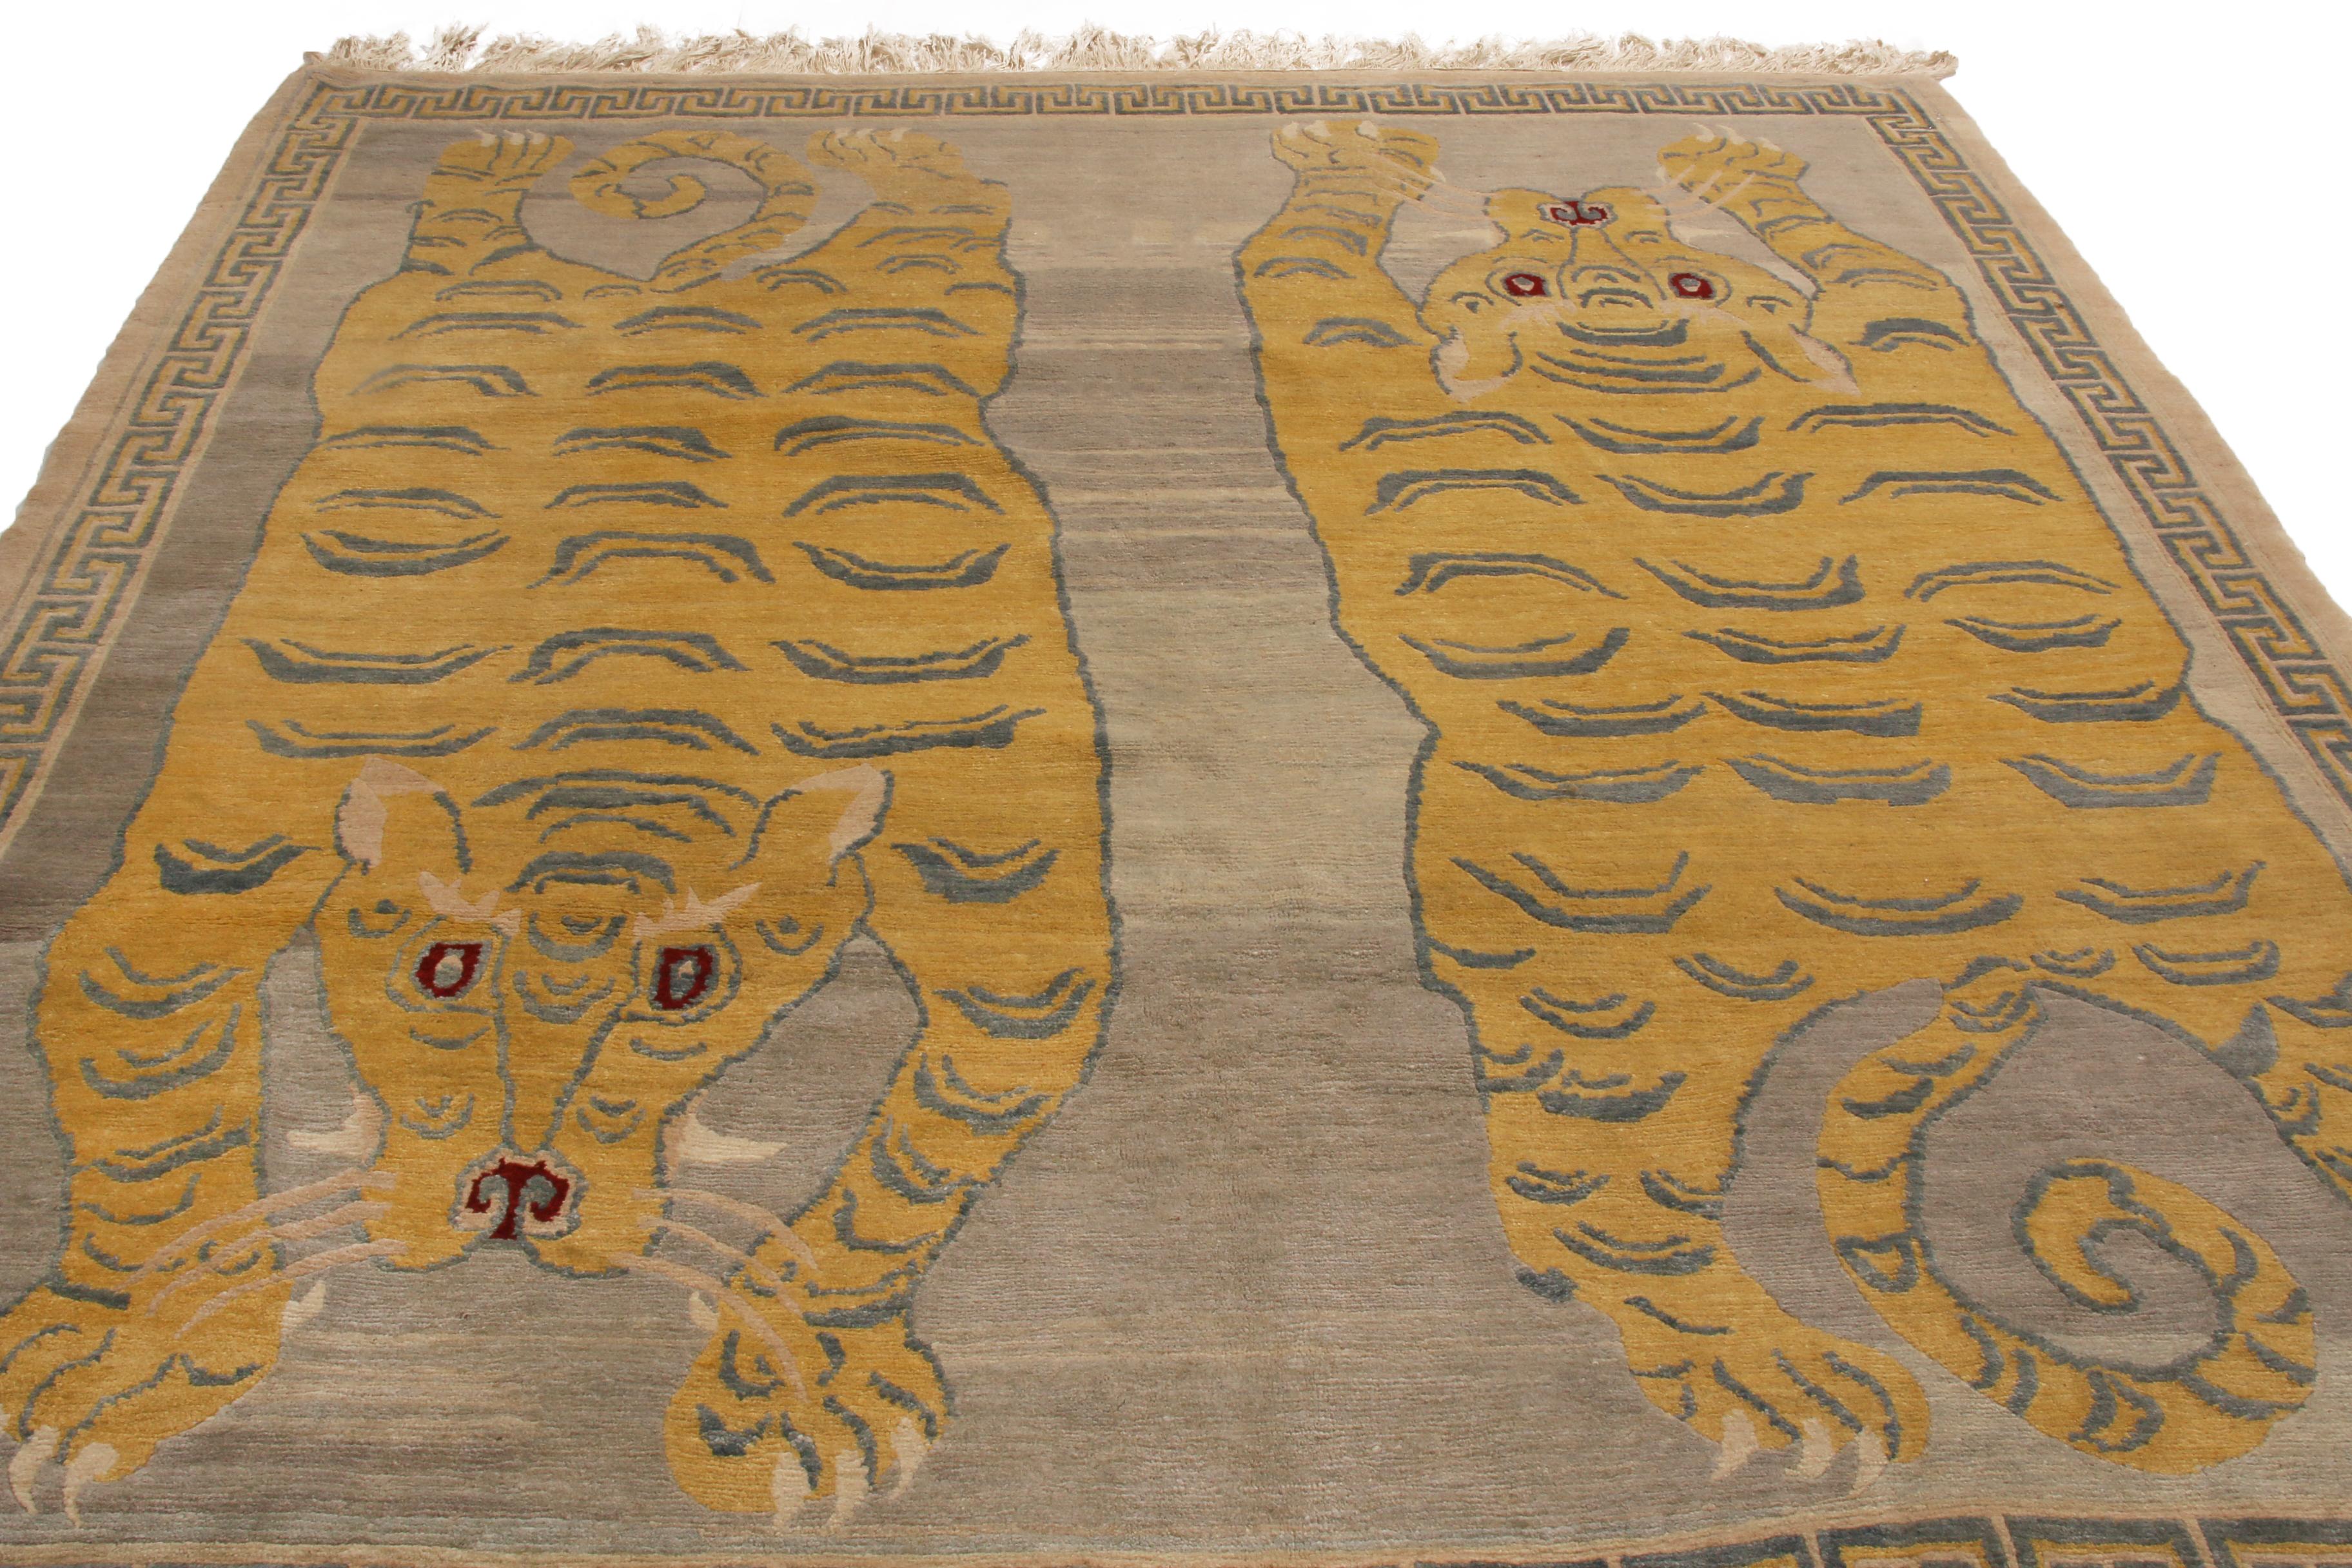 Originating from Nepal, this wool Tigris rug is hand knotted in high quality wool depicting a transitional interpretation of a Classic Tibetan design. Featuring mirrored, coarsely braided fringes and durable guard border, the finely woven Chinese